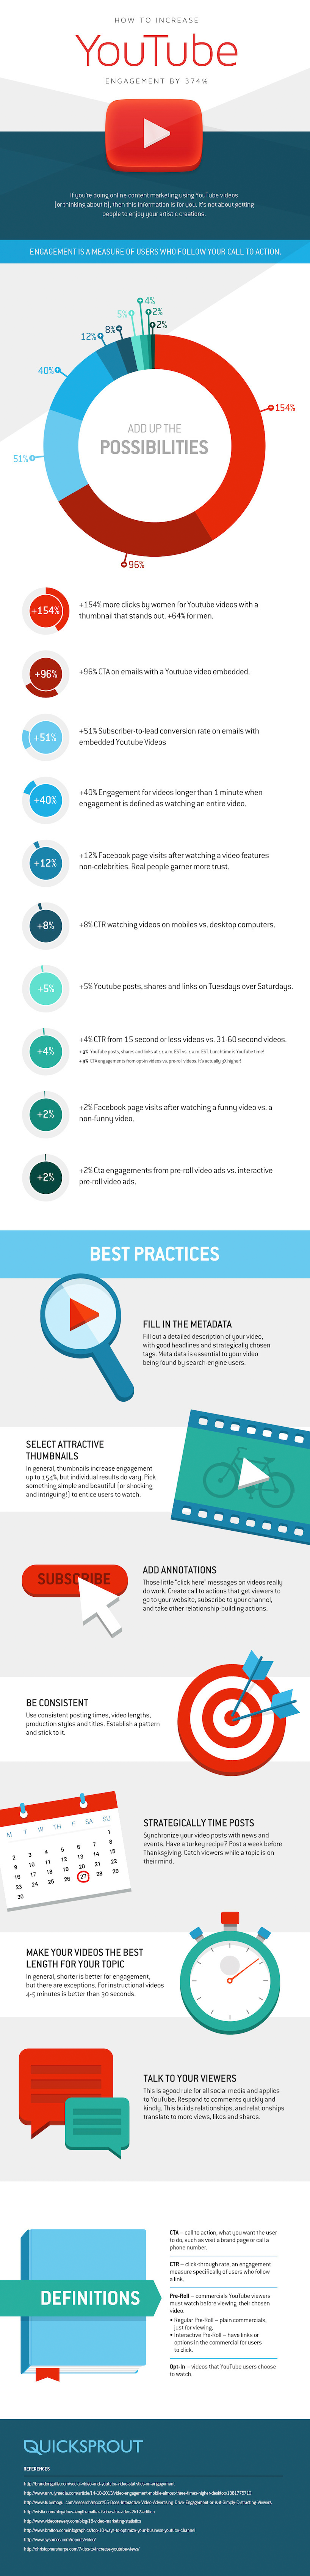 increase-youtube-engagement-infographic (1)